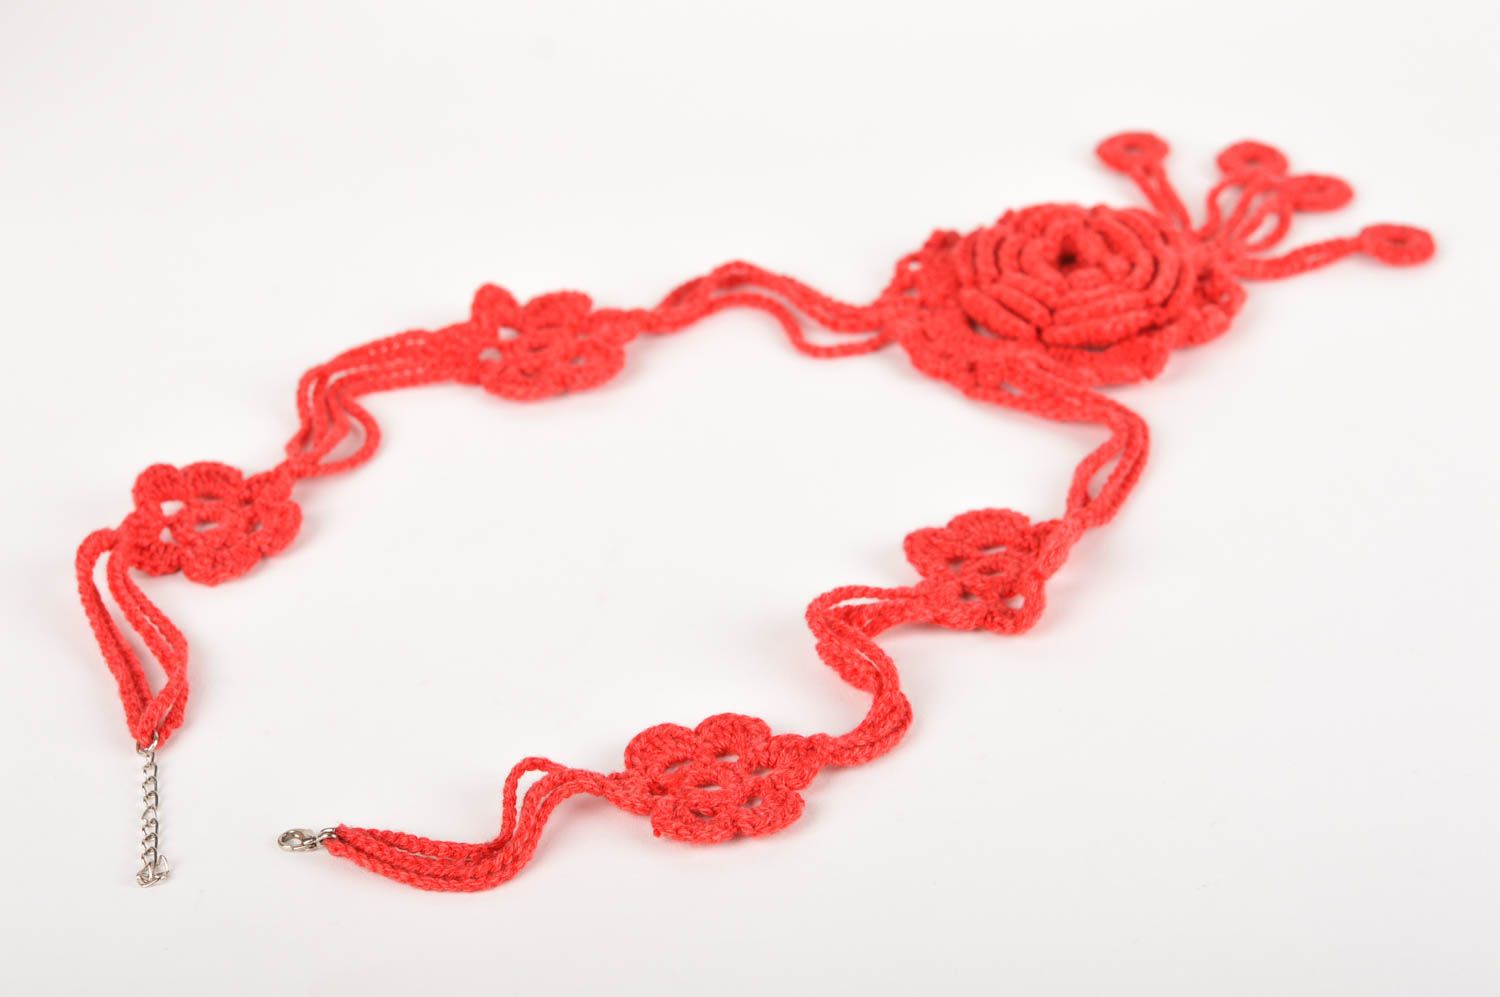 Handmade necklace crochet accessories fashion necklaces for women gifts for her photo 5